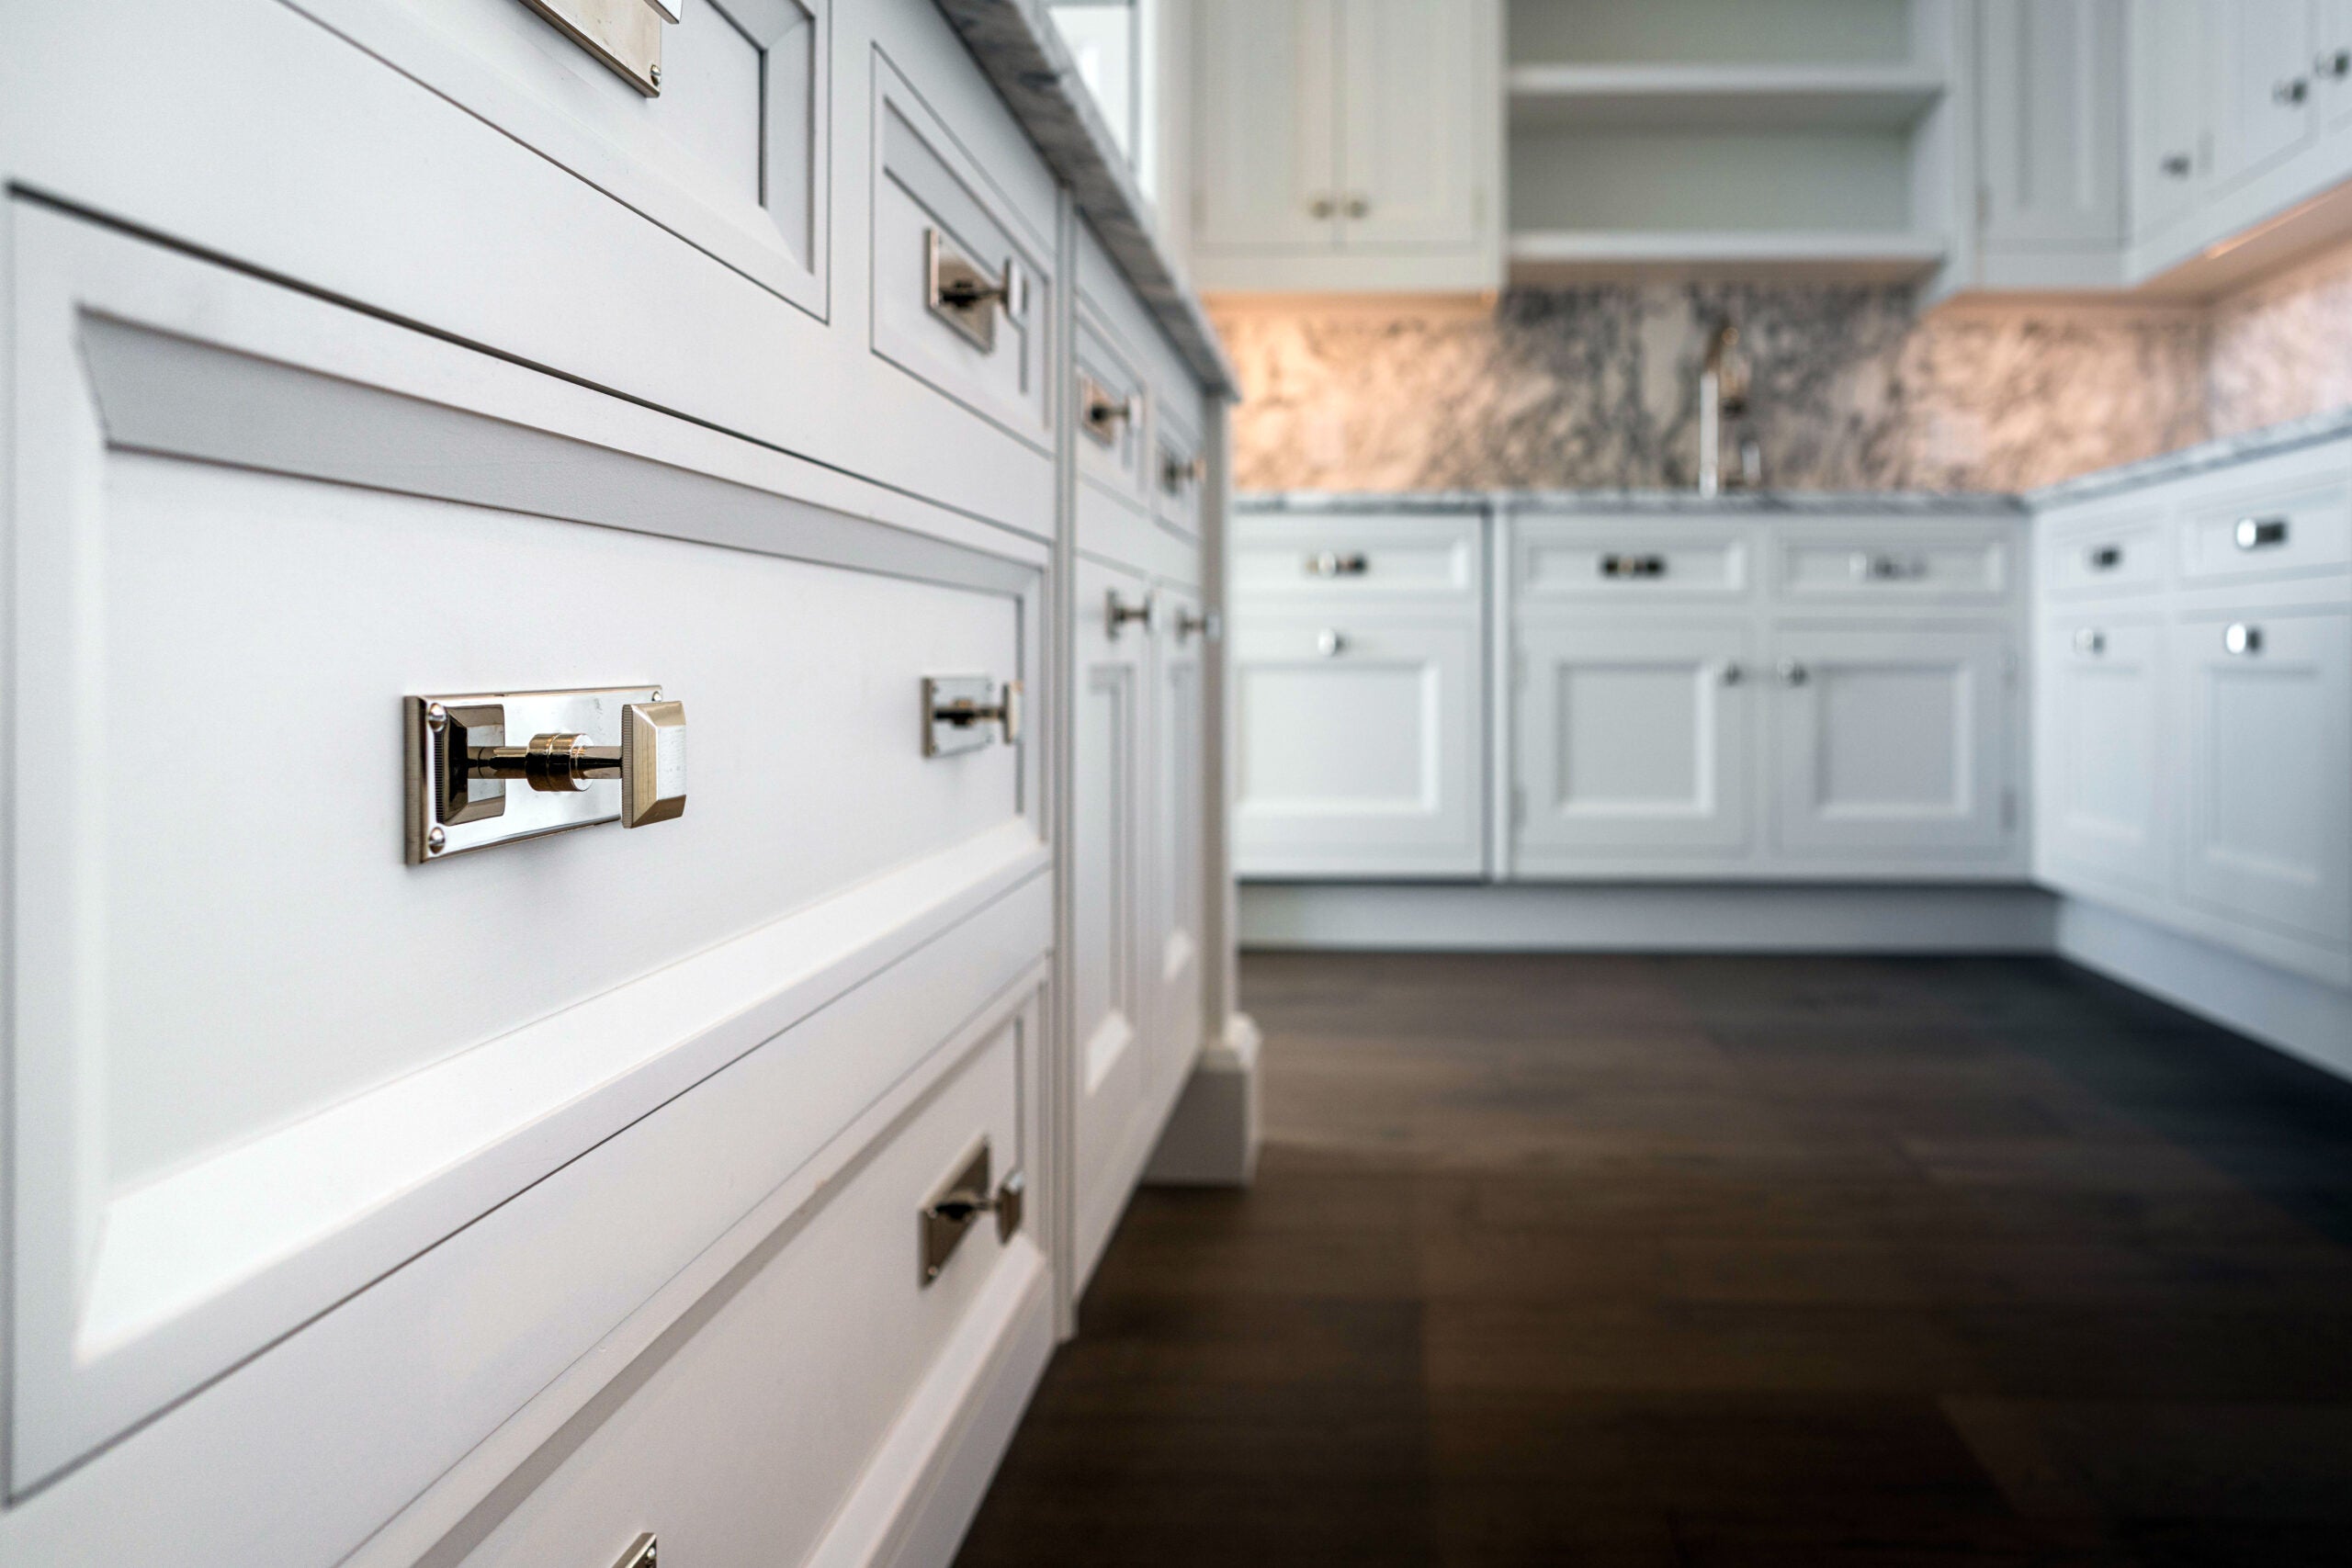 A close-up look at white kitchen drawers.